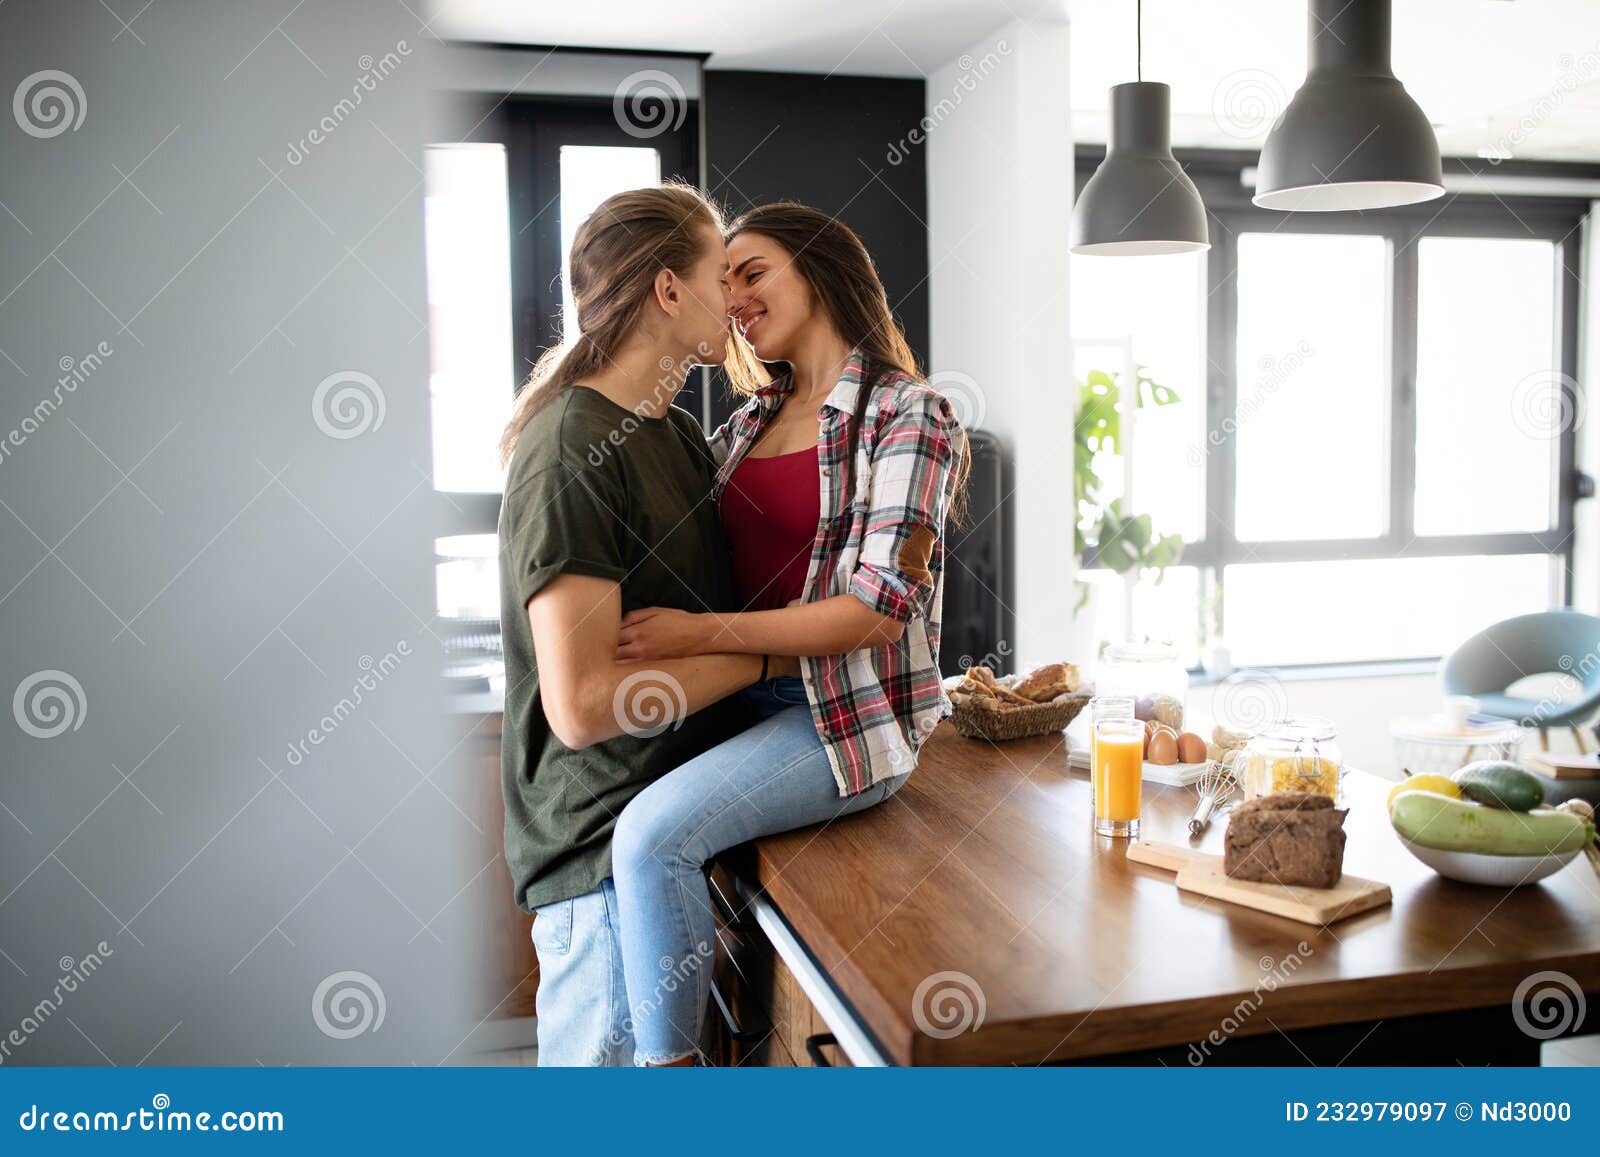 Beautiful Young Passionate Couple is Smiling and Hugging before Having Sex at Home Stock Image photo